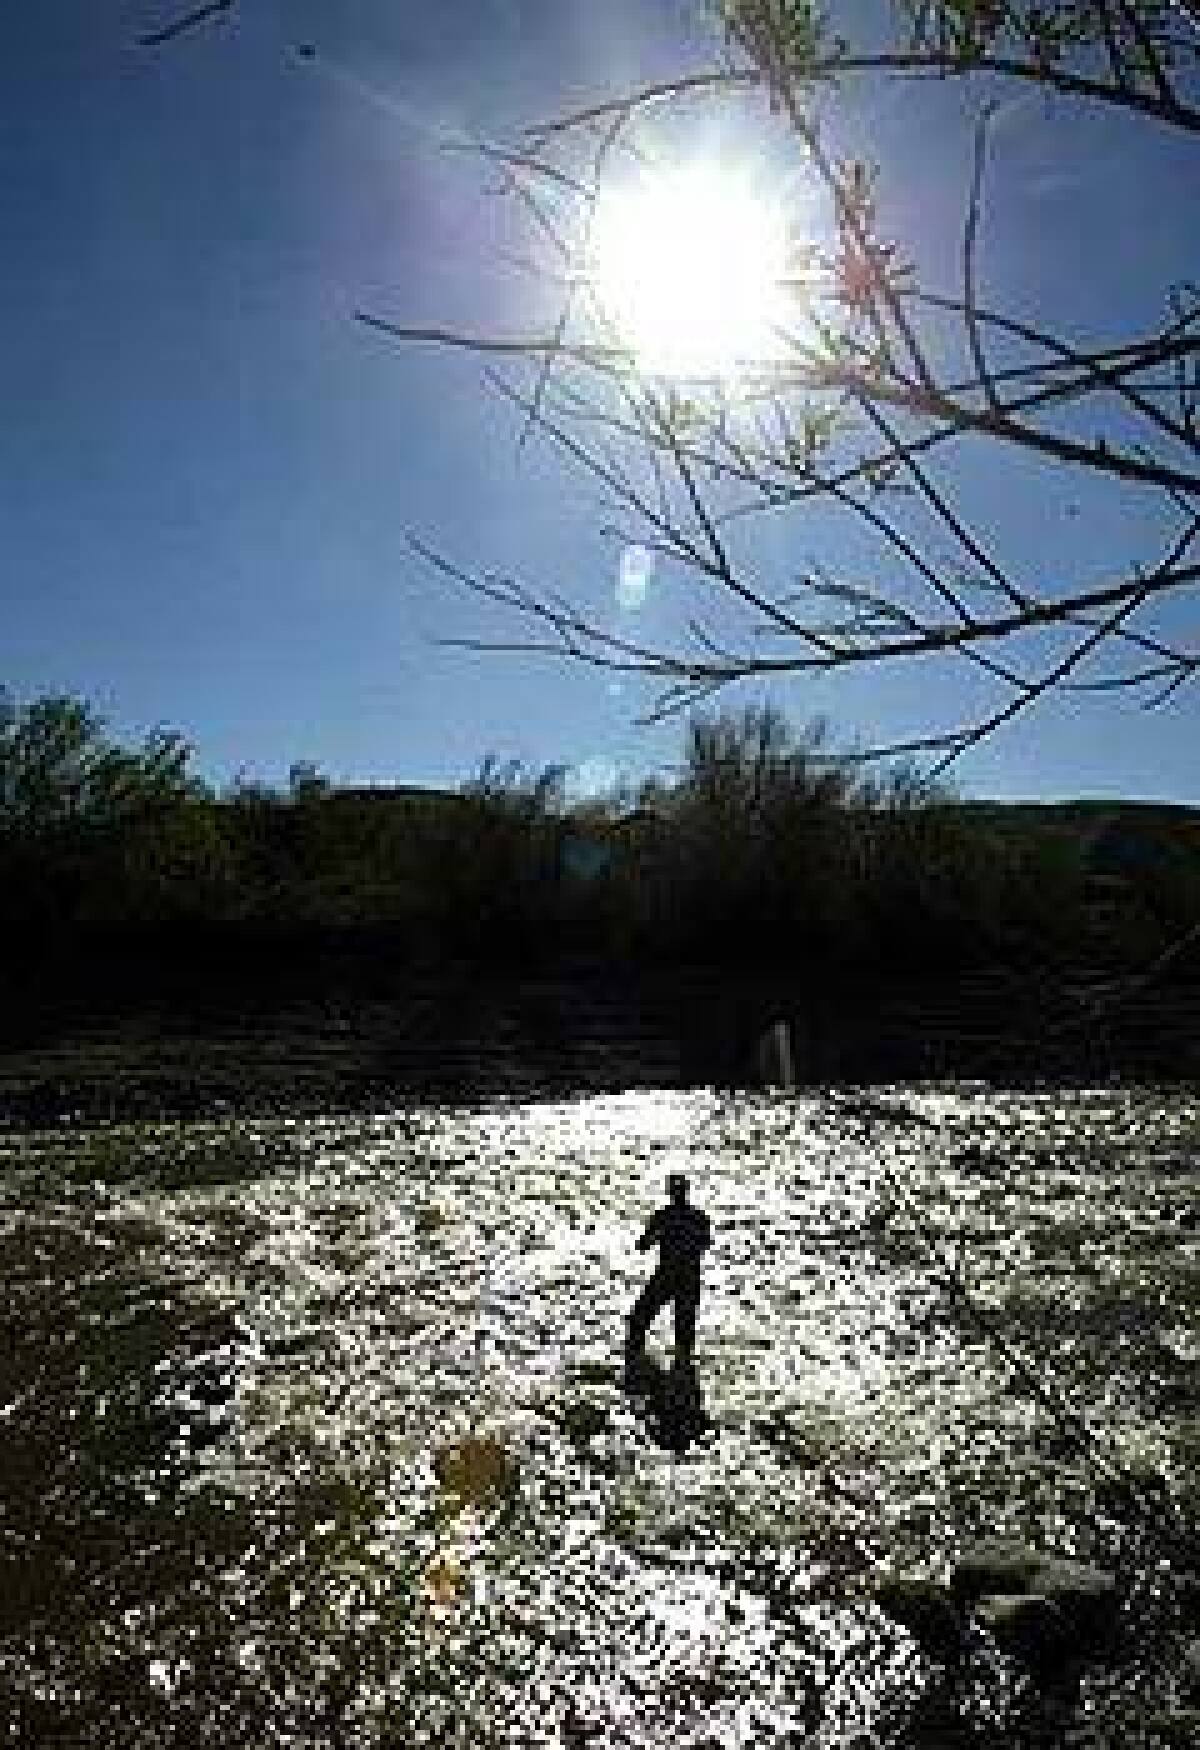 Rex Pray fishes in Piru Creek, which may be destroyed by a change in state water policy.